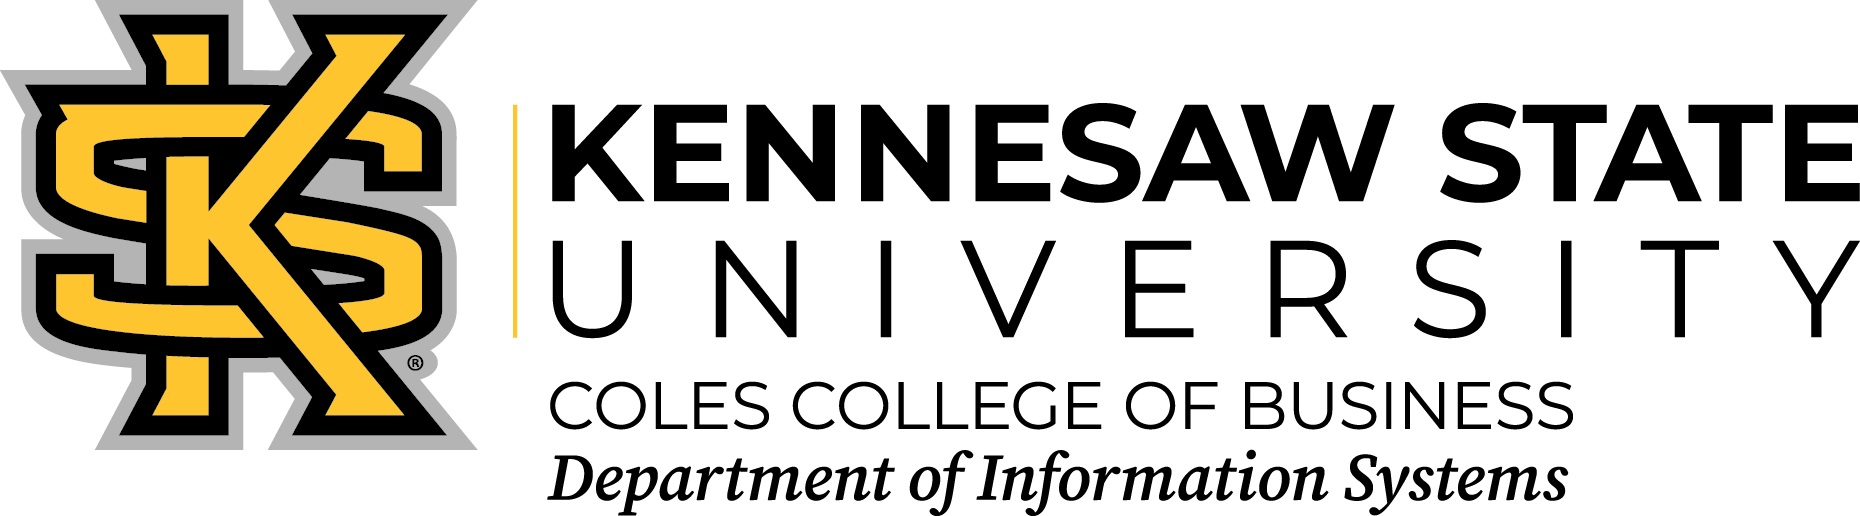 Coles College of Business (Kennesaw State University) logo